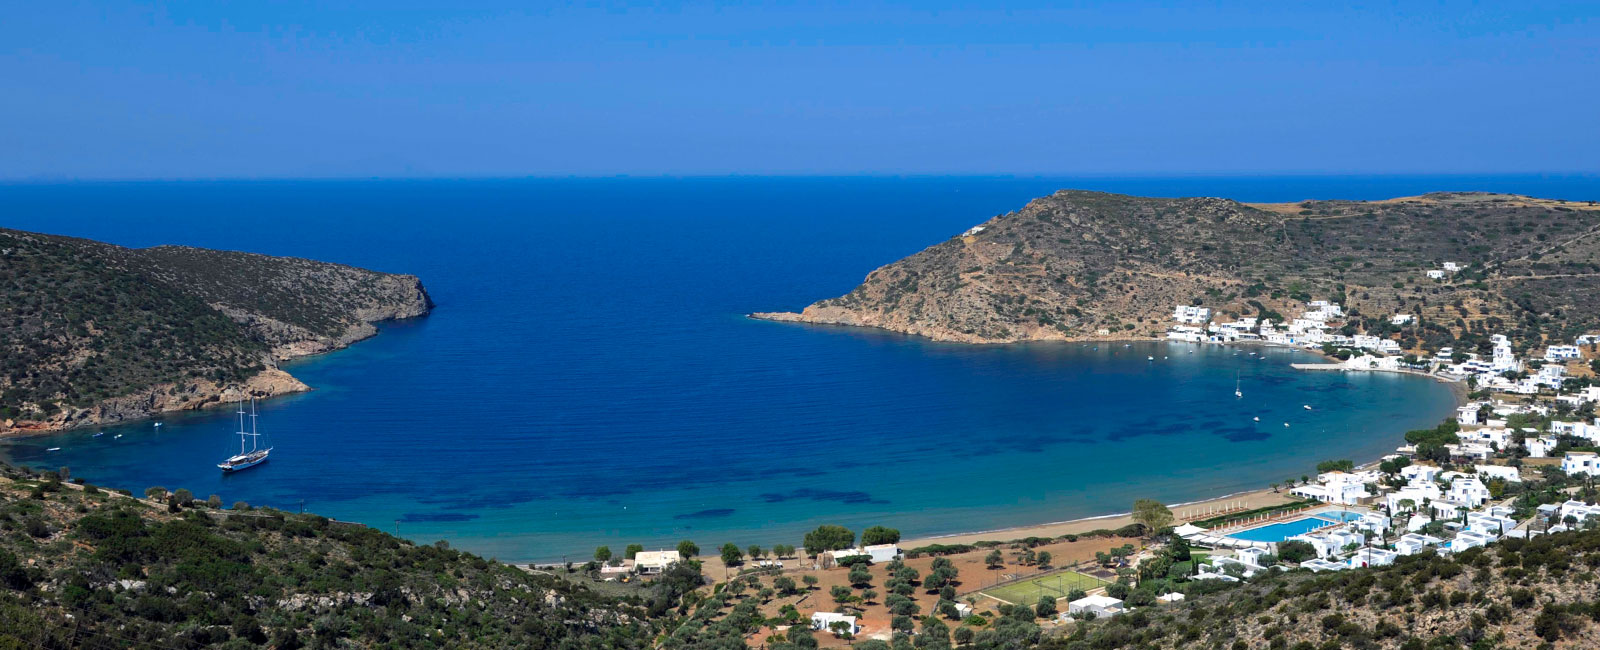 The village of Vathi in Sifnos